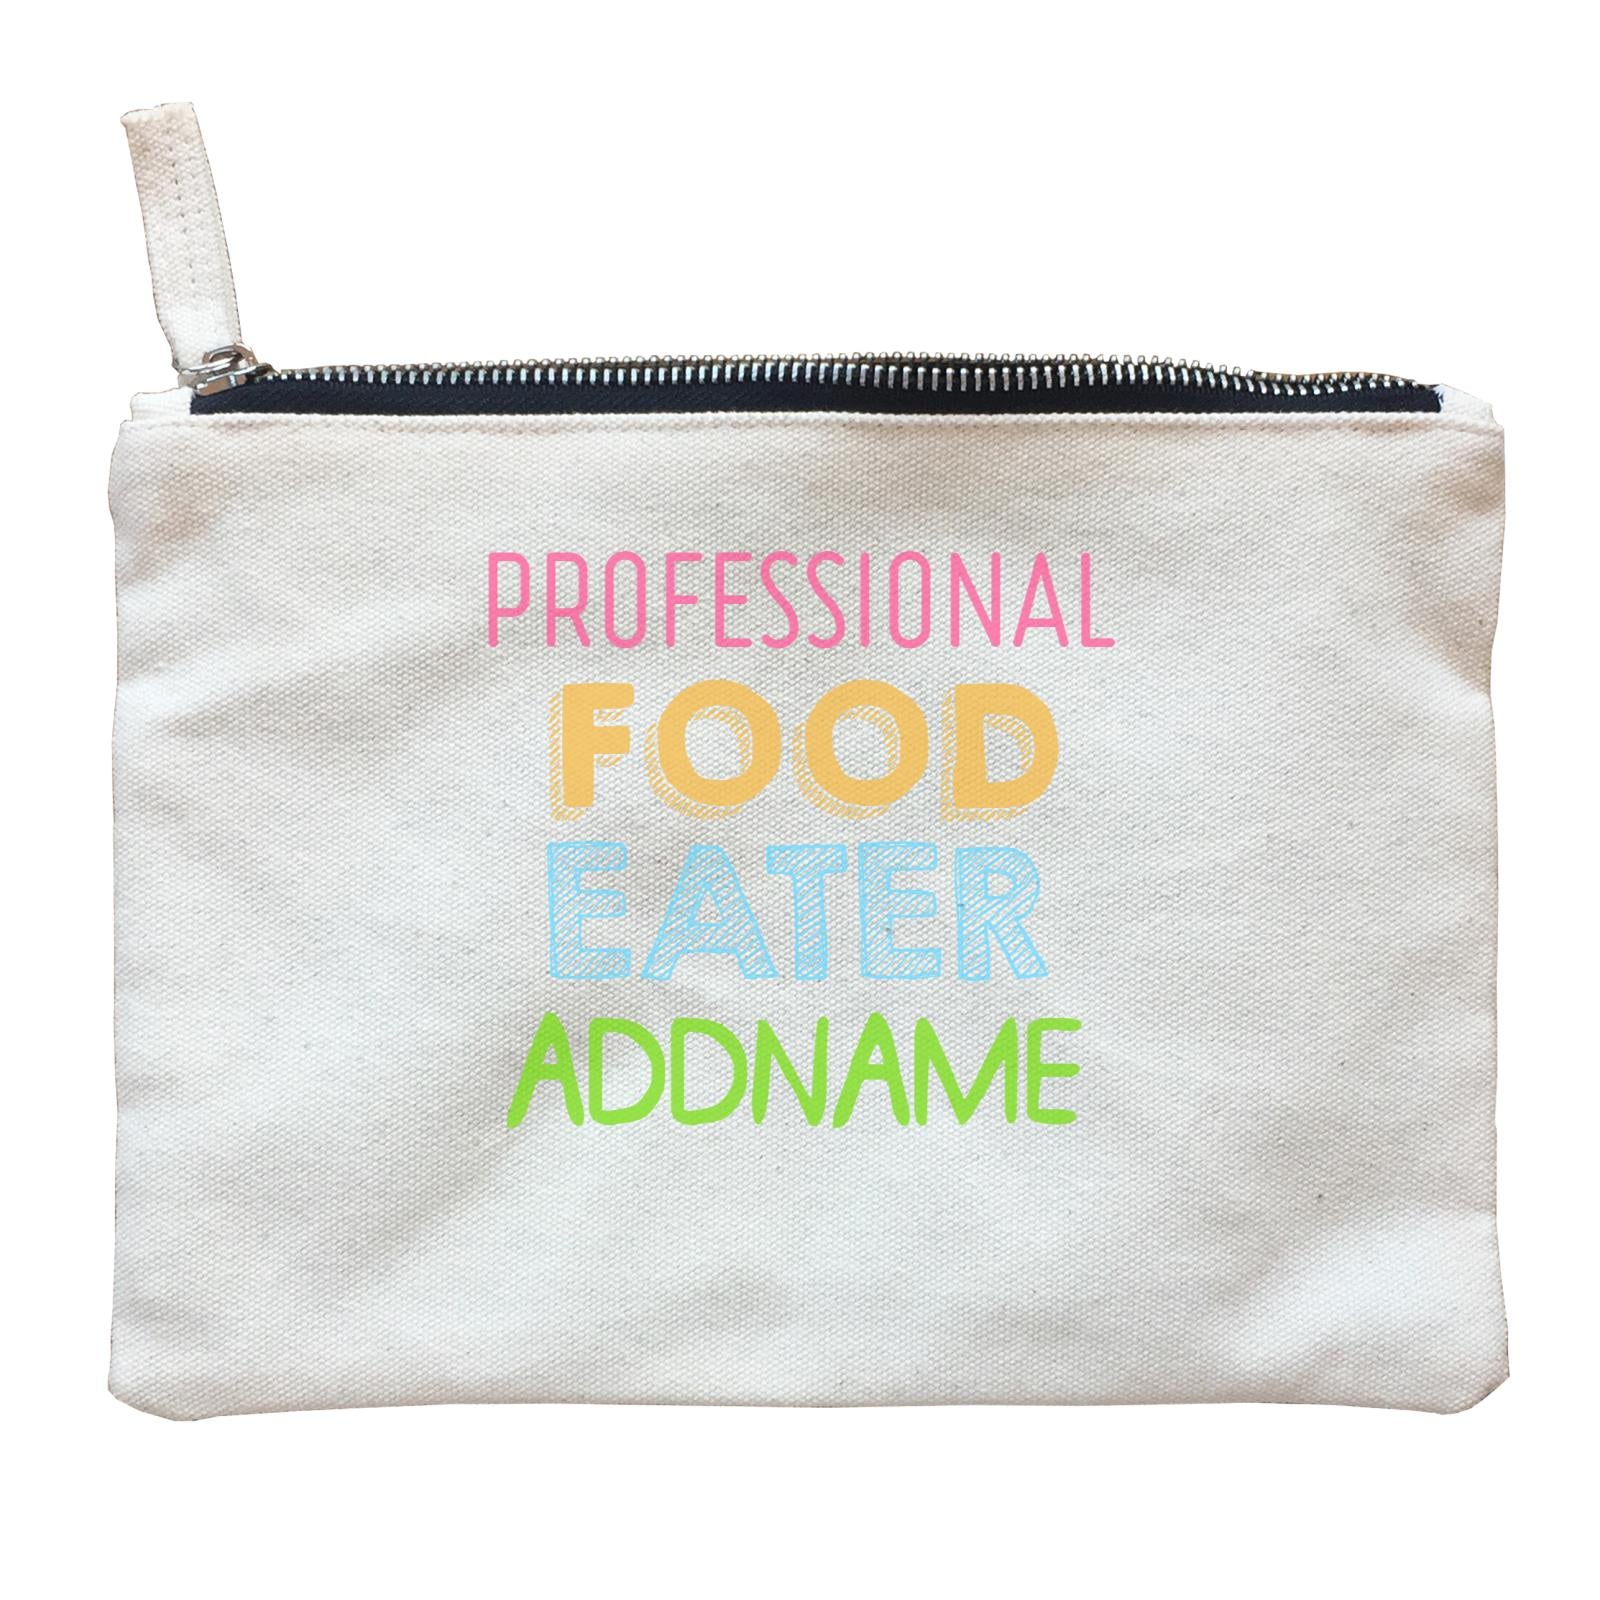 Professional Food Eater Addname Zipper Pouch